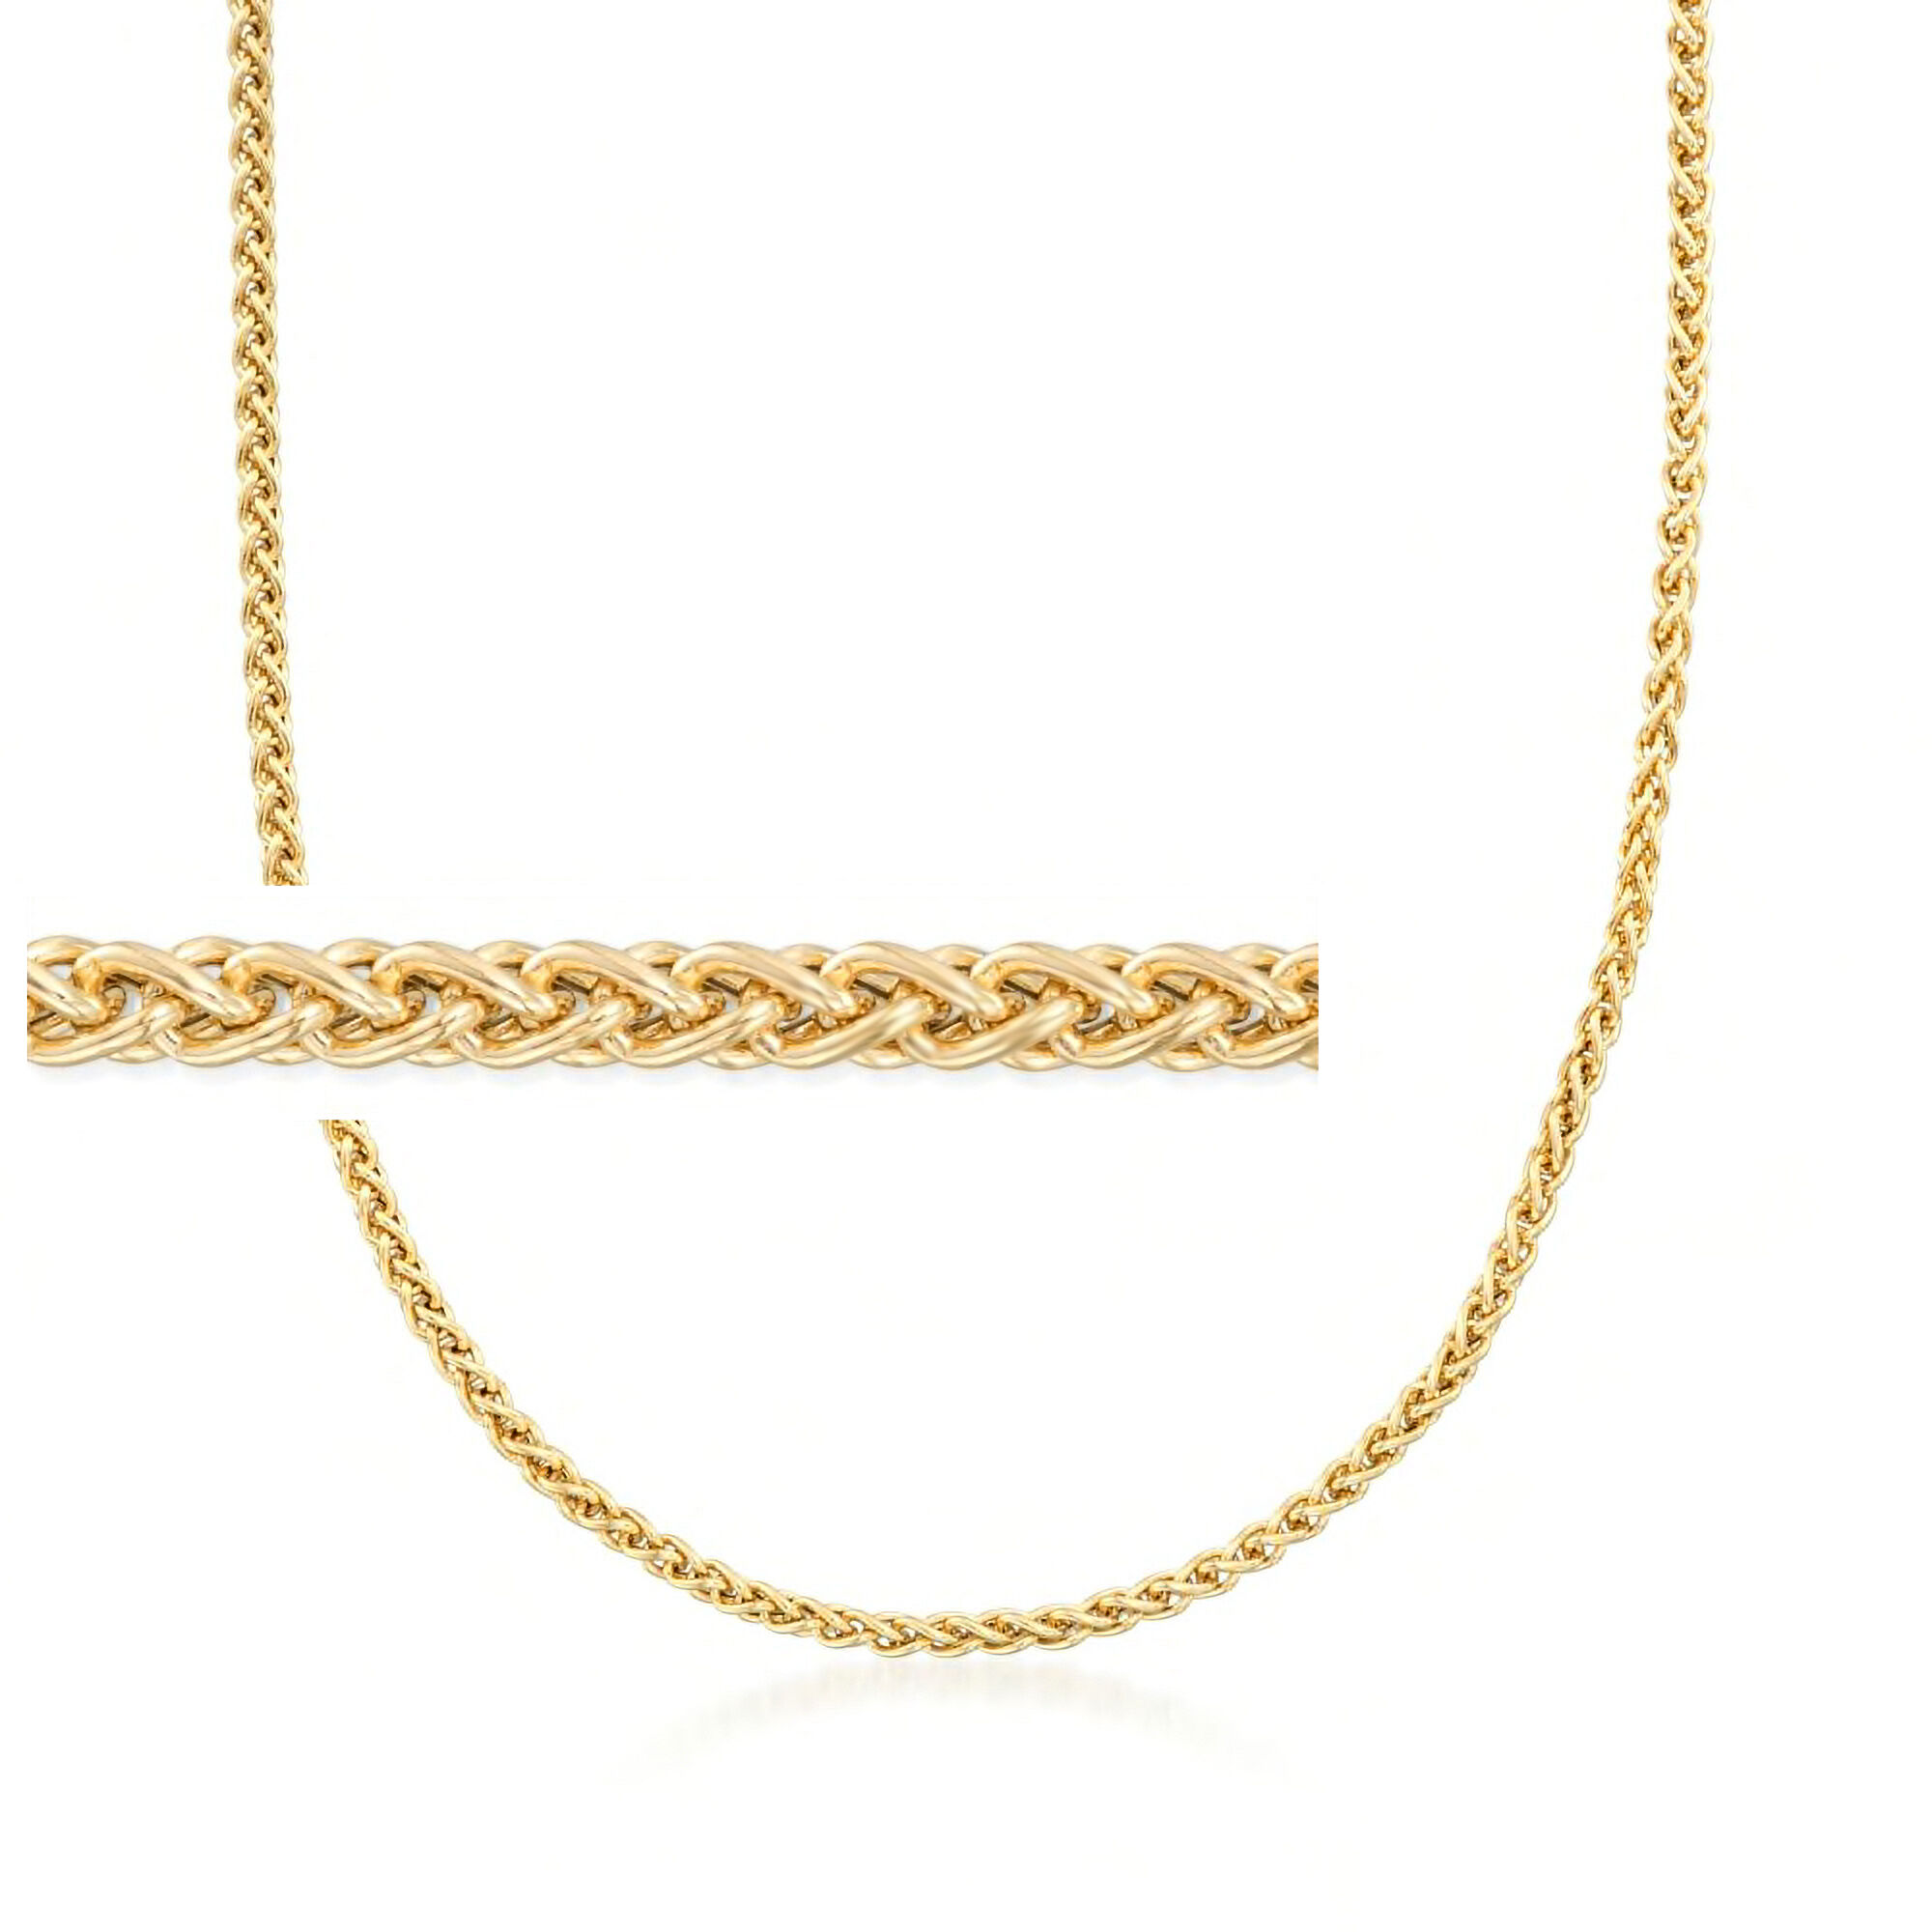 Ross Simons Gold Chains on Sale, UP TO 65% OFF | www.ldeventos.com